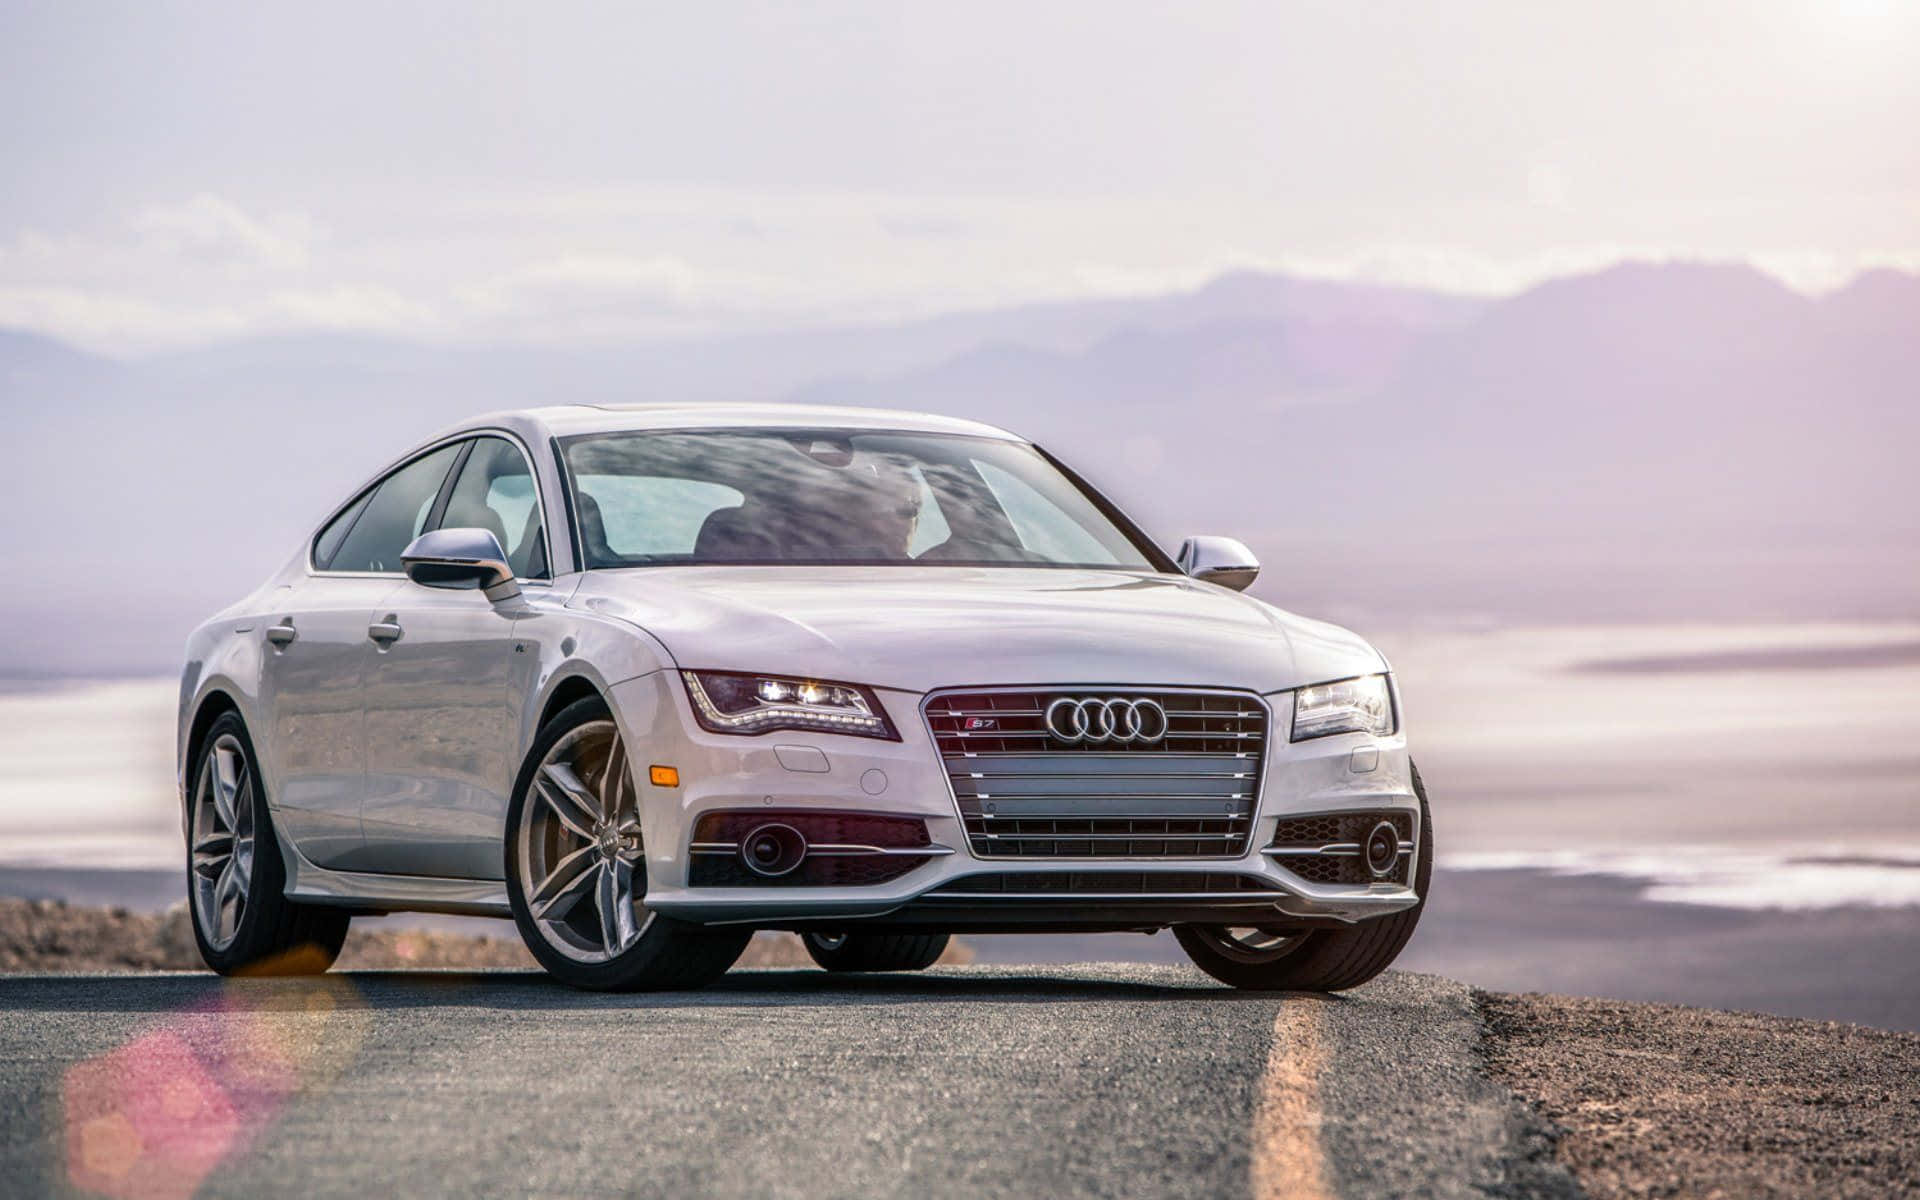 Audi S7: Powerful, Luxurious, and Elegant Wallpaper